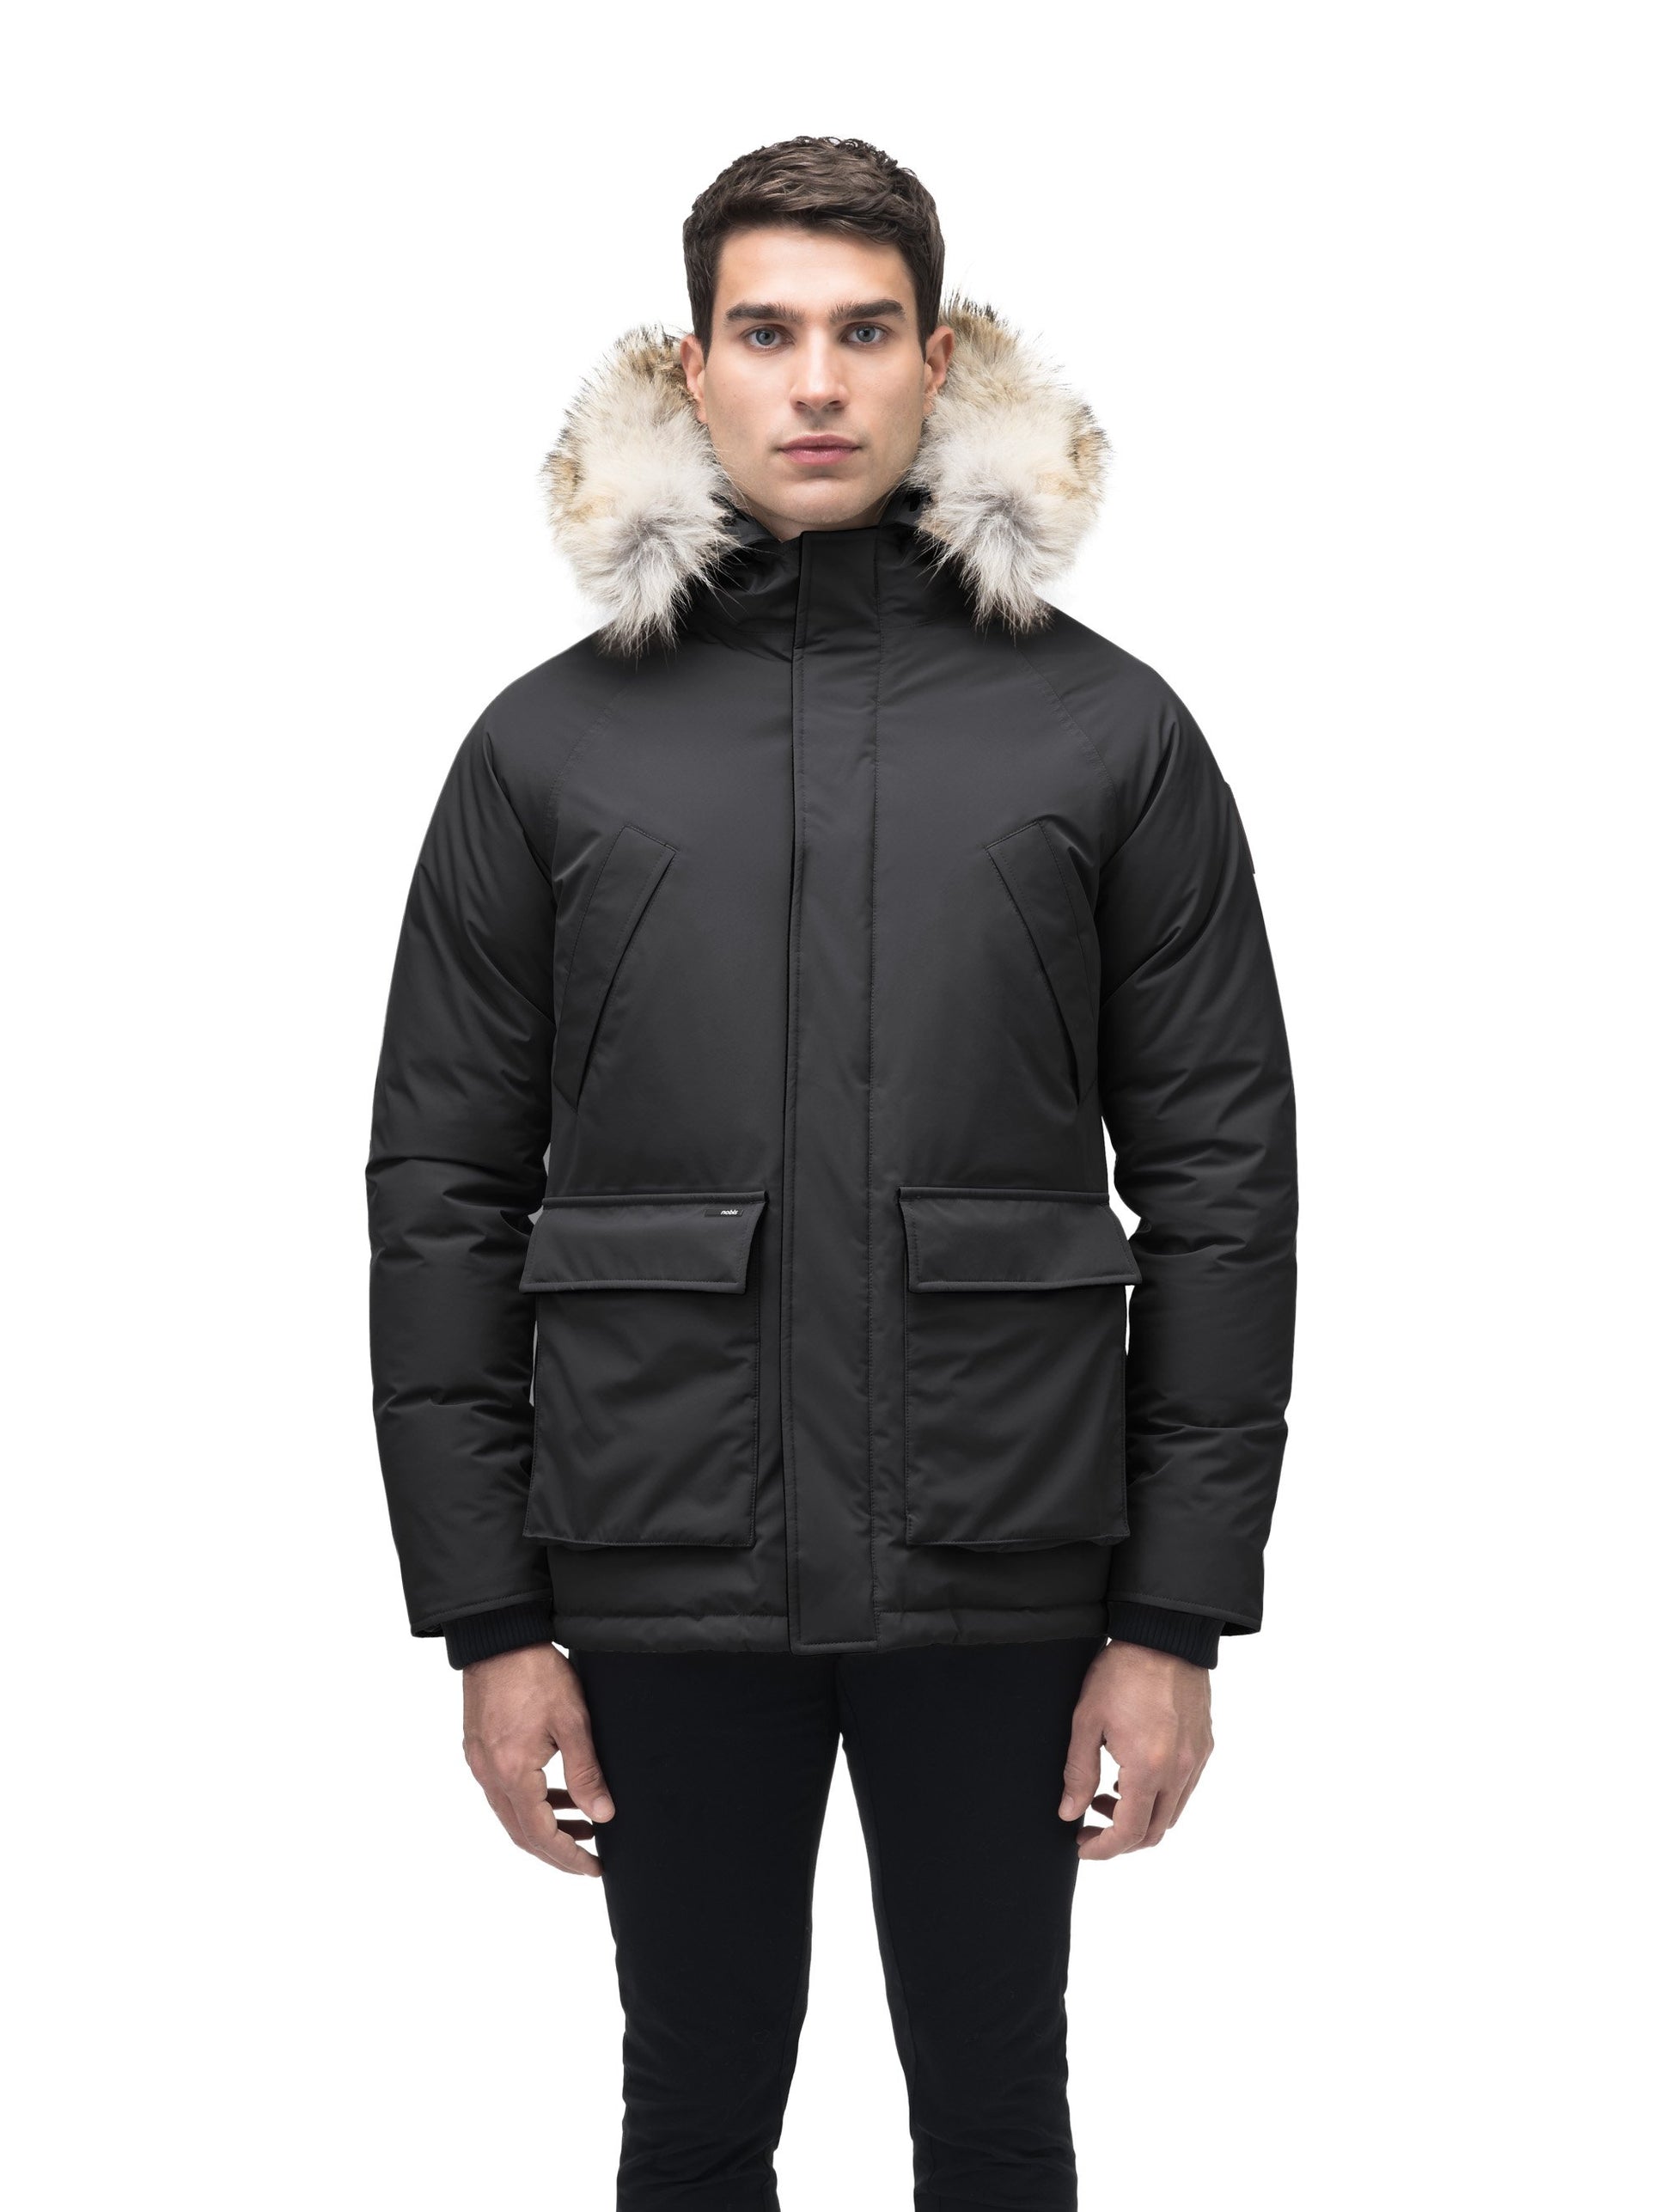 Men's waist length down filled jacket with two front pockets with magnetic closure and a removable fur trim on the hood in Cy Black